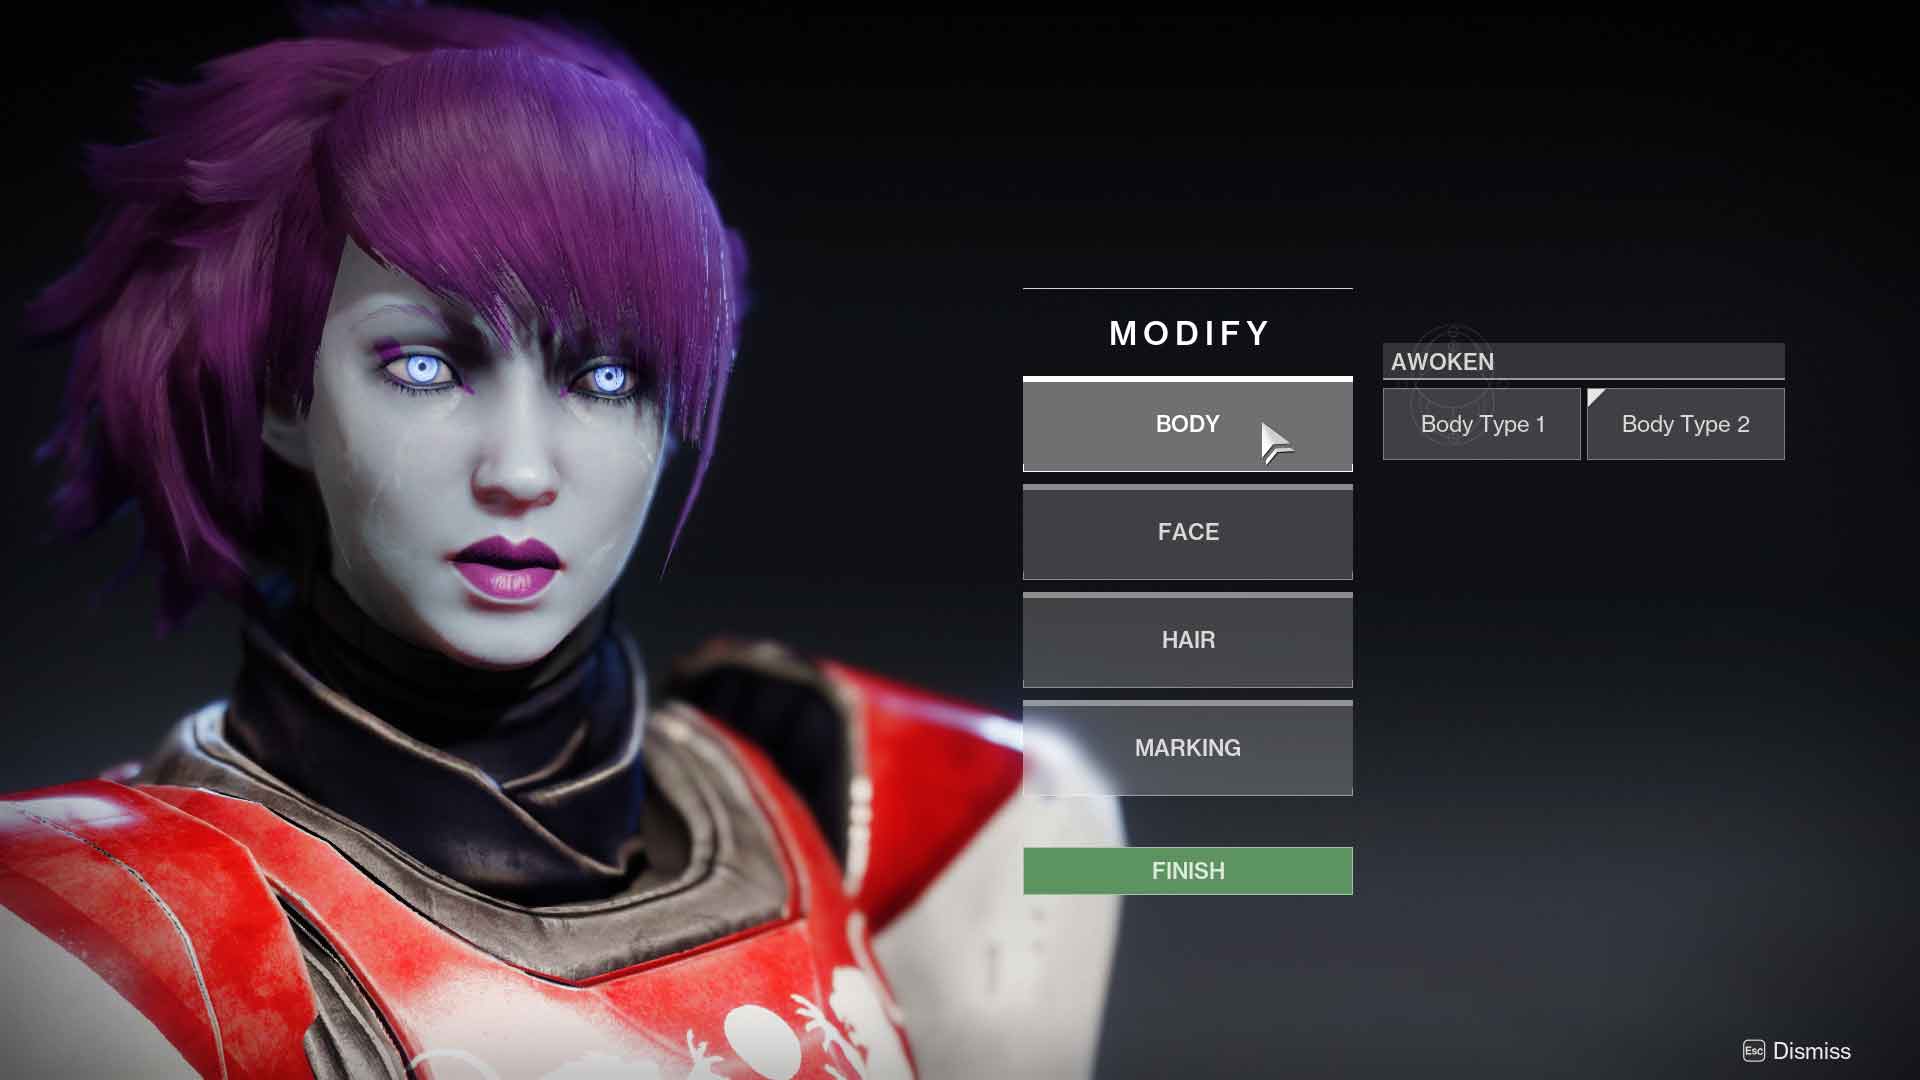 Destiny 2 character customization reveal from Bungie showing the in-game menu